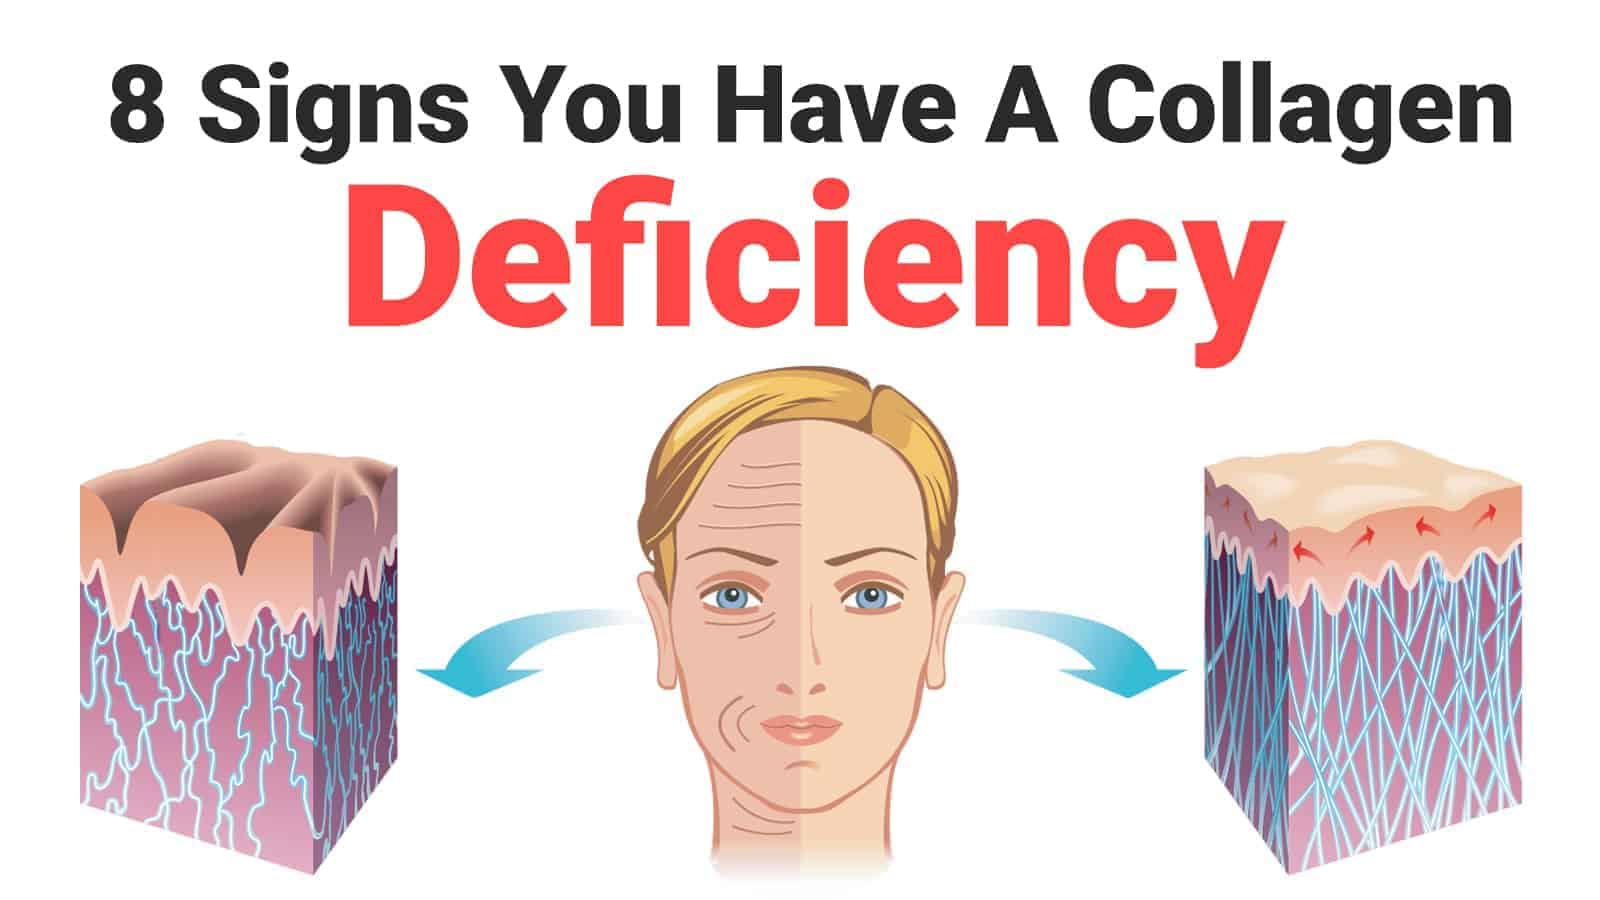 8 Signs You Have A Collagen Deficiency